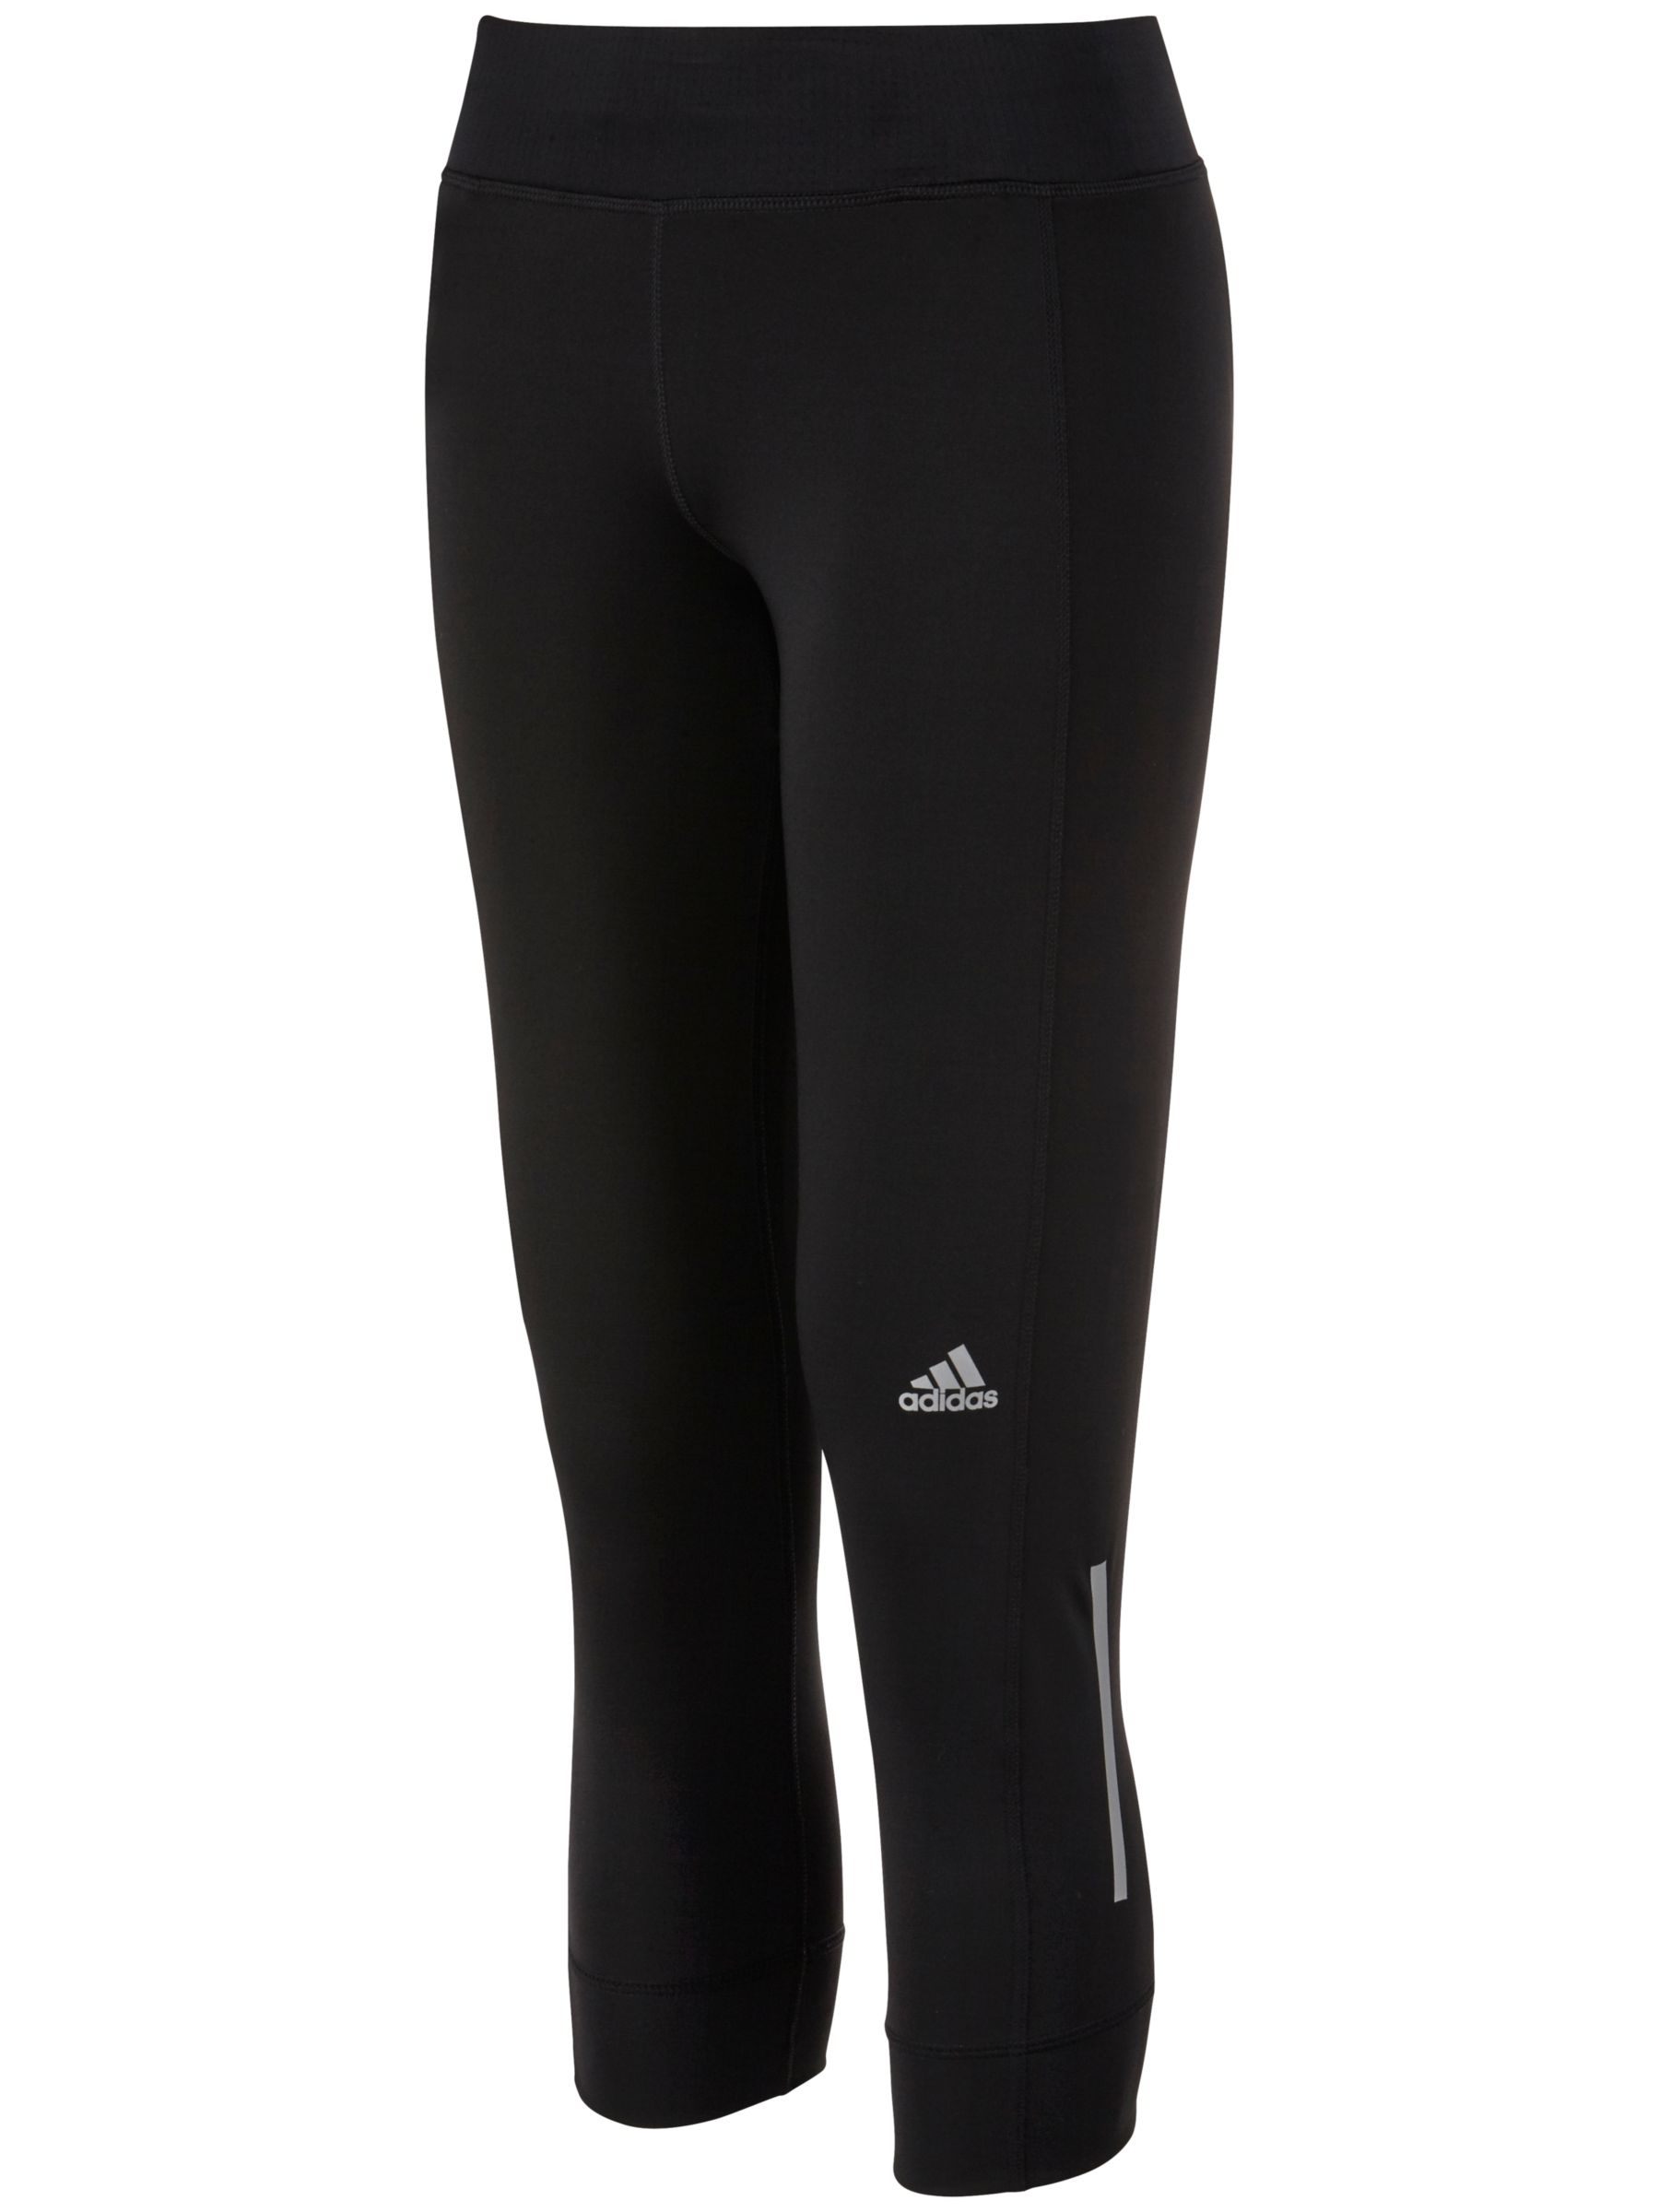 sequencials climacool running tights